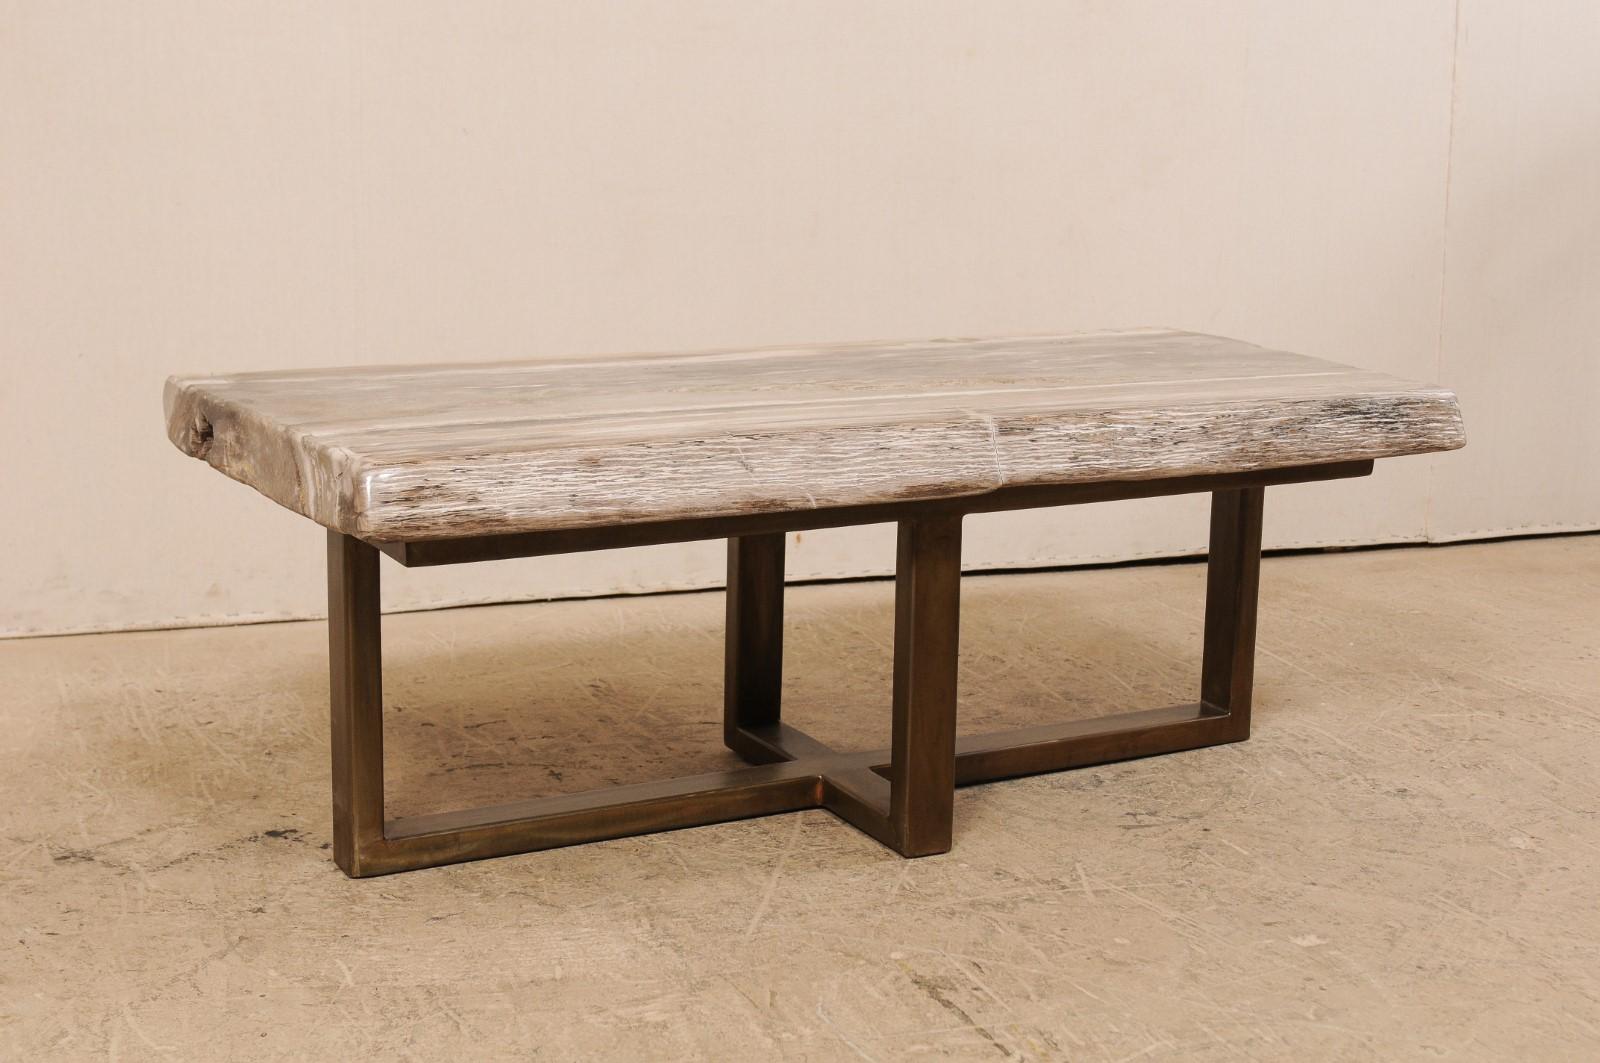 A petrified wood top modernly designed coffee table (or bench). This custom coffee table has been fashioned from a gorgeous single thick slab of smoothly polished petrified wood. This petrified wood top, with is soothing grey and white palette, is